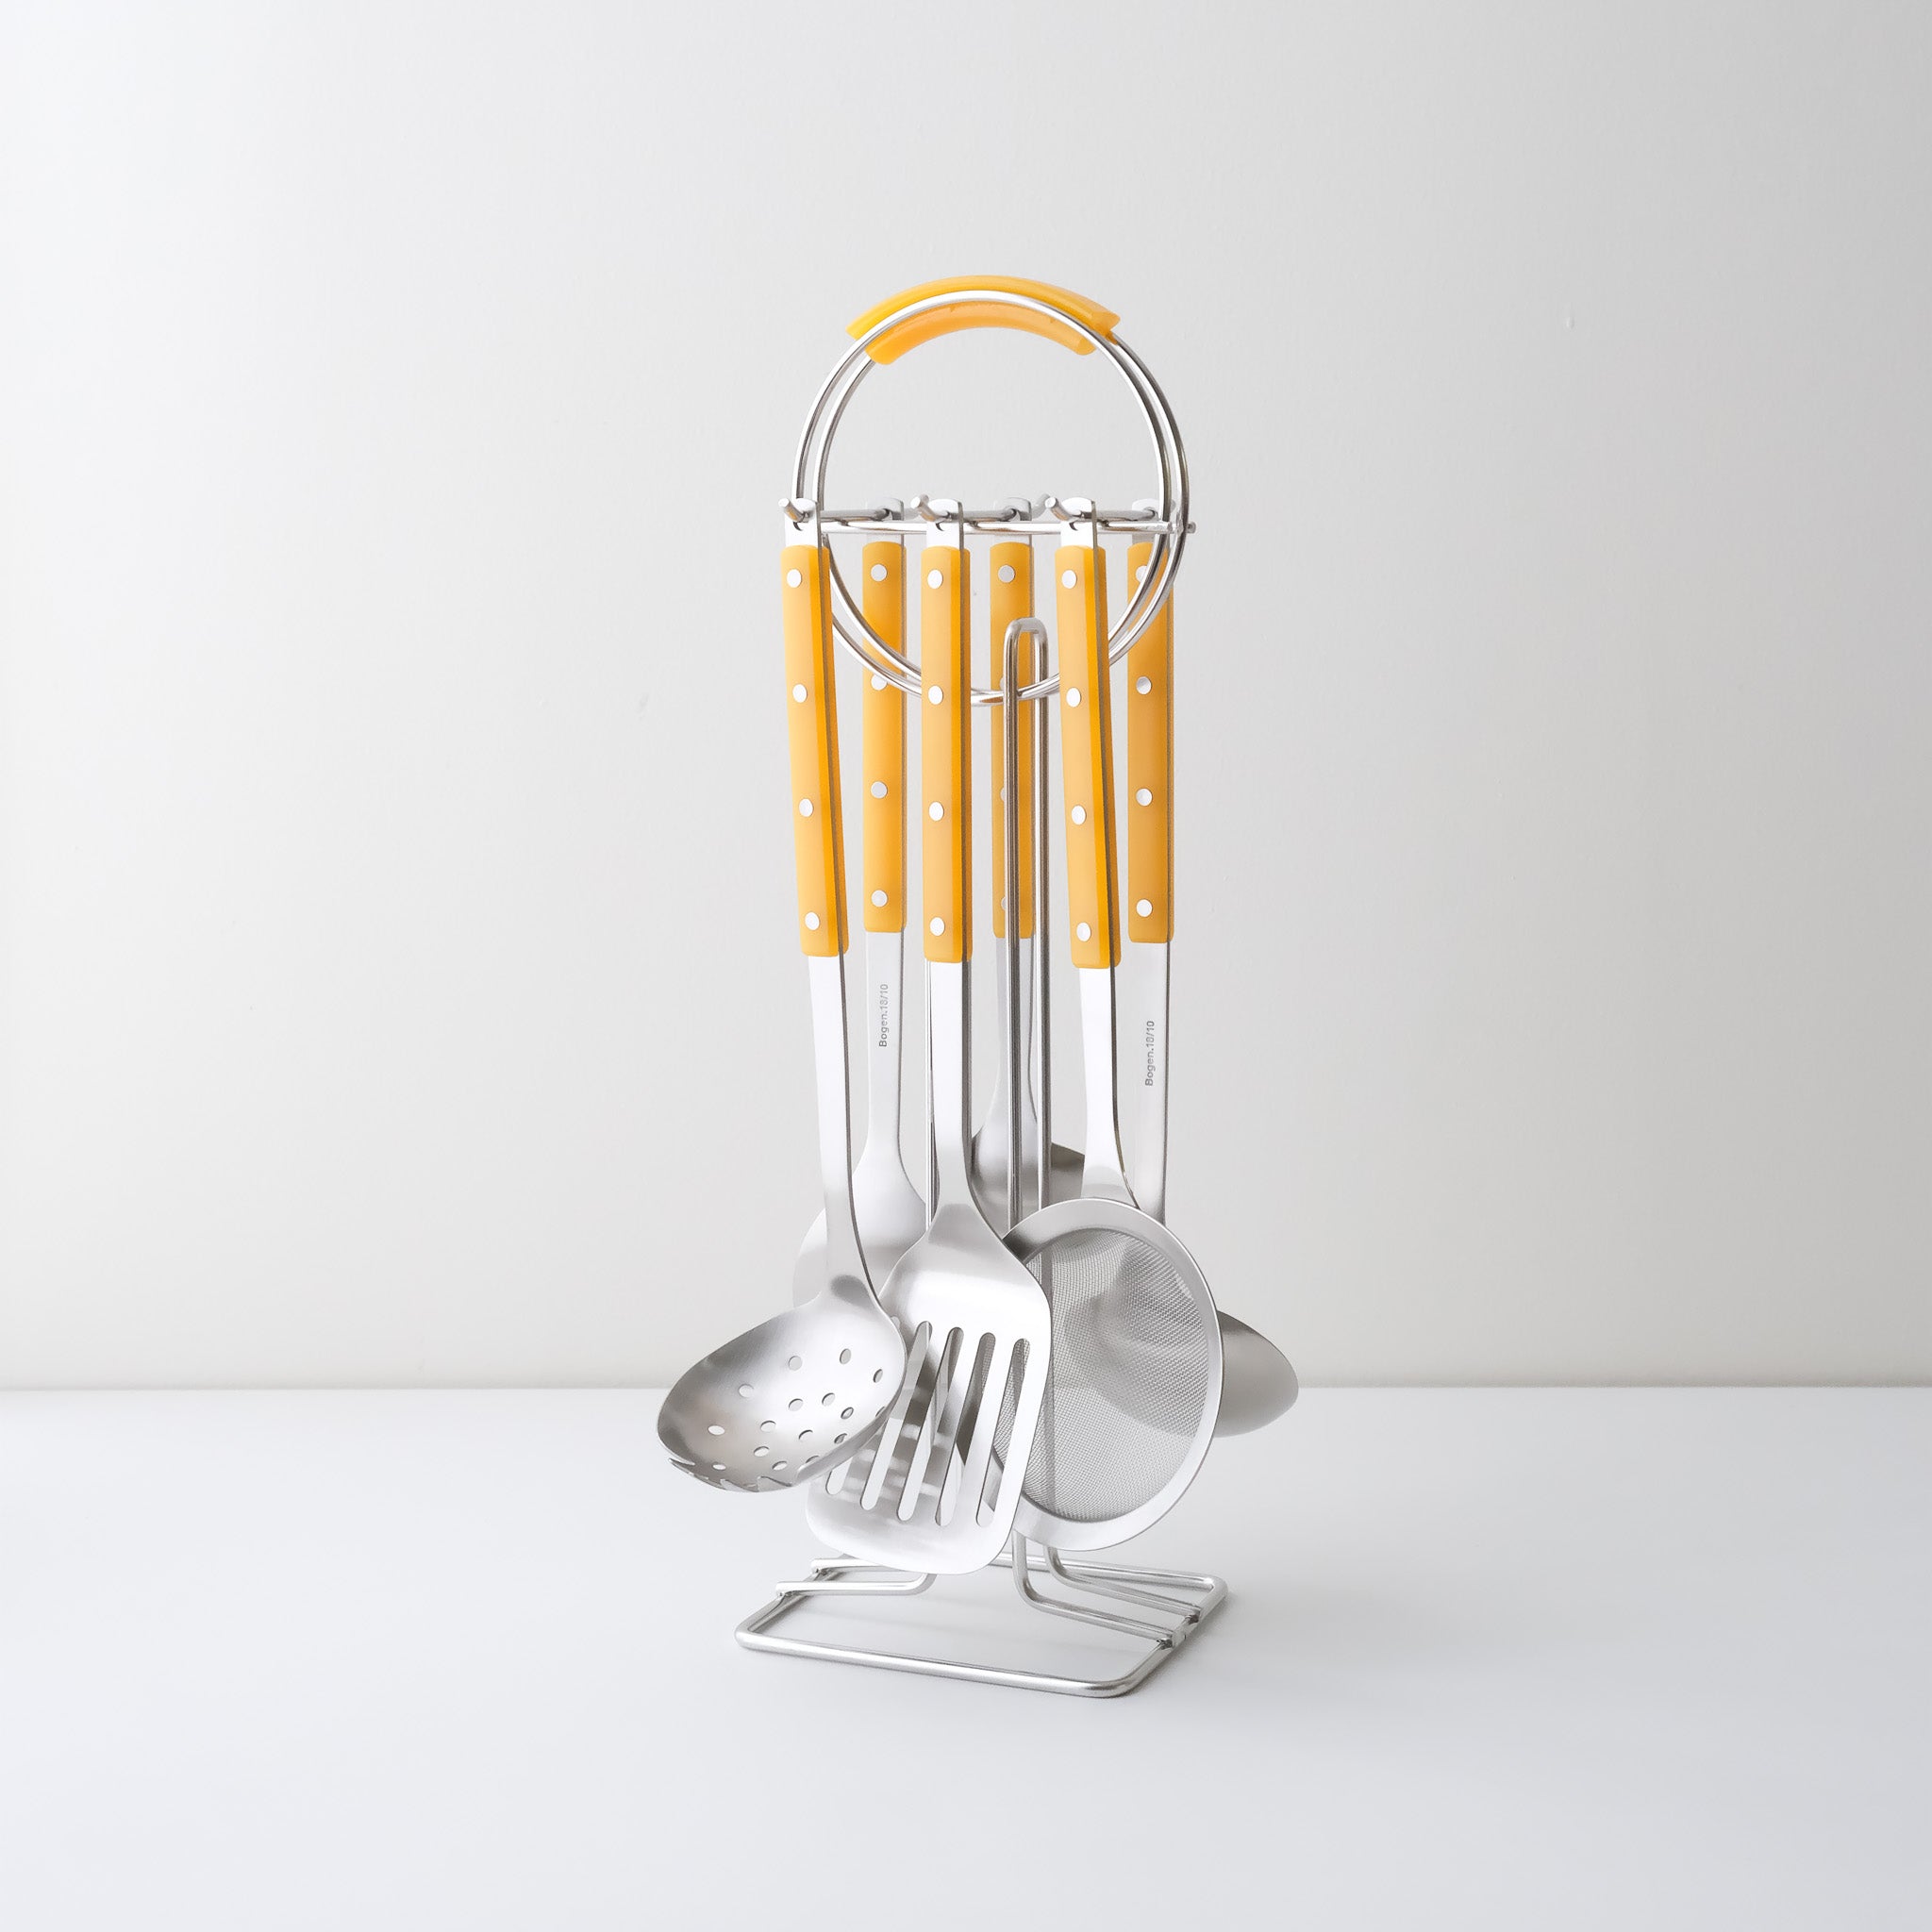 Bistro Cooking Tools (7 Options) - Yellow